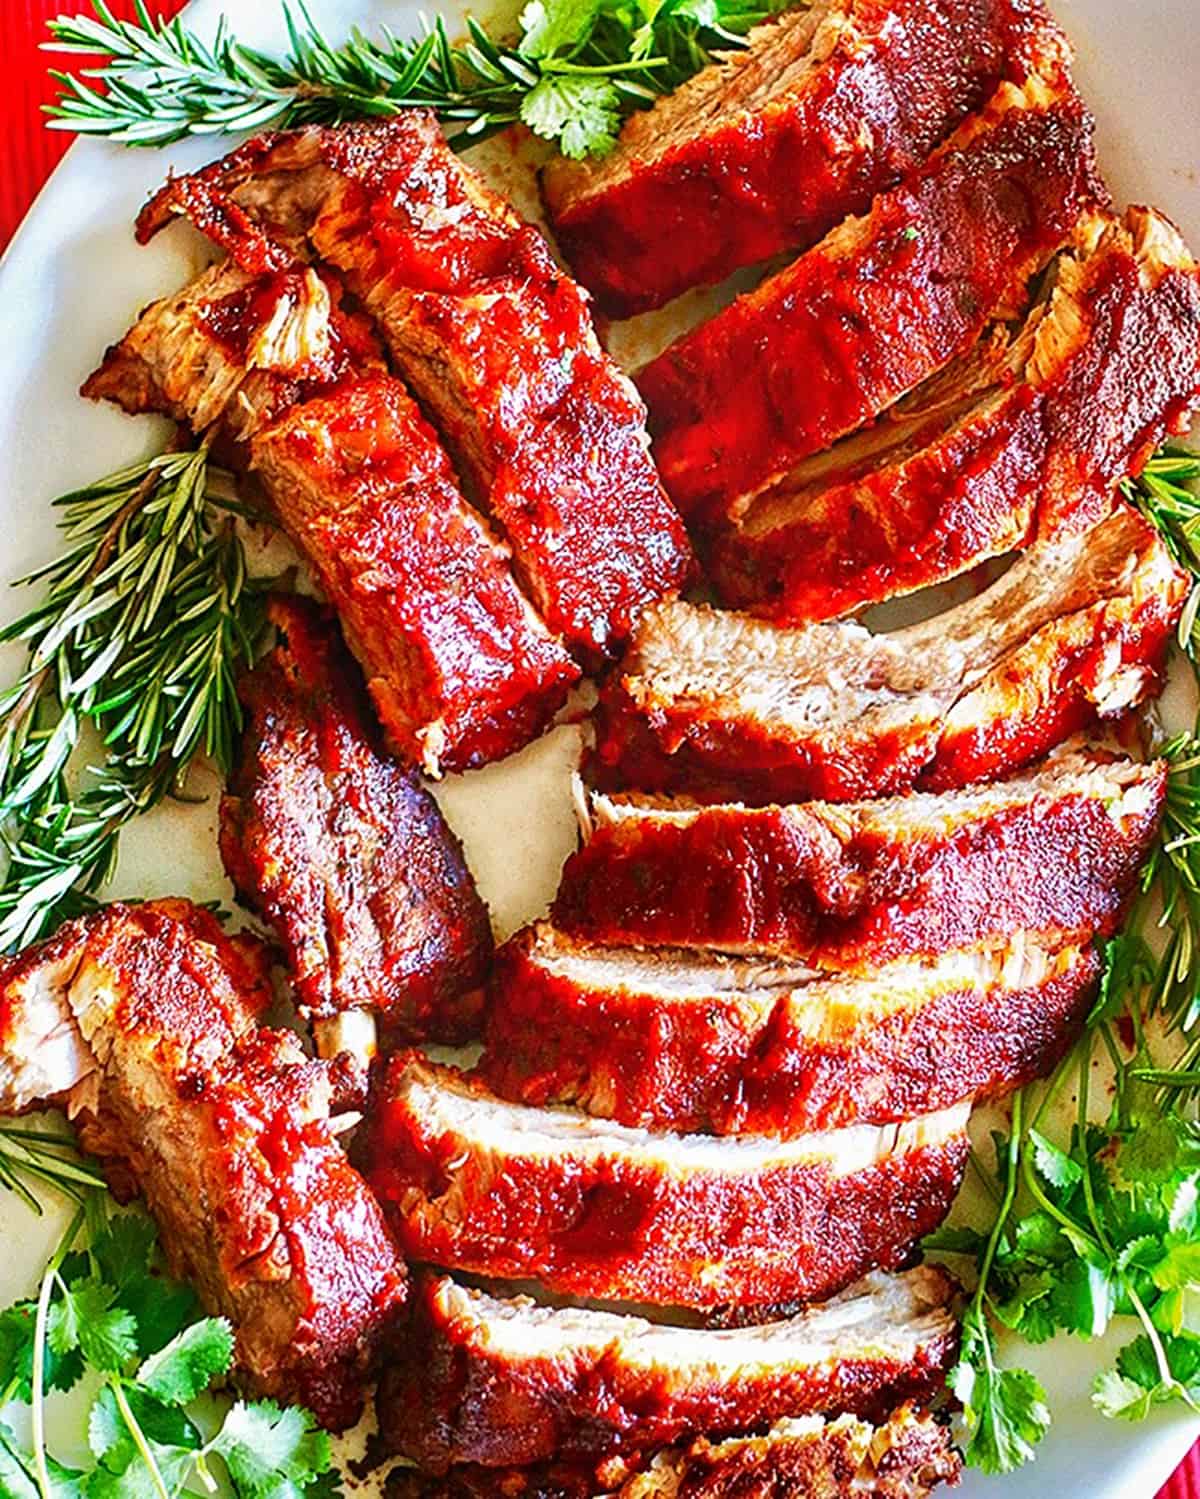 plate full of sliced instant pot pork ribs with rosemary and other herbs.